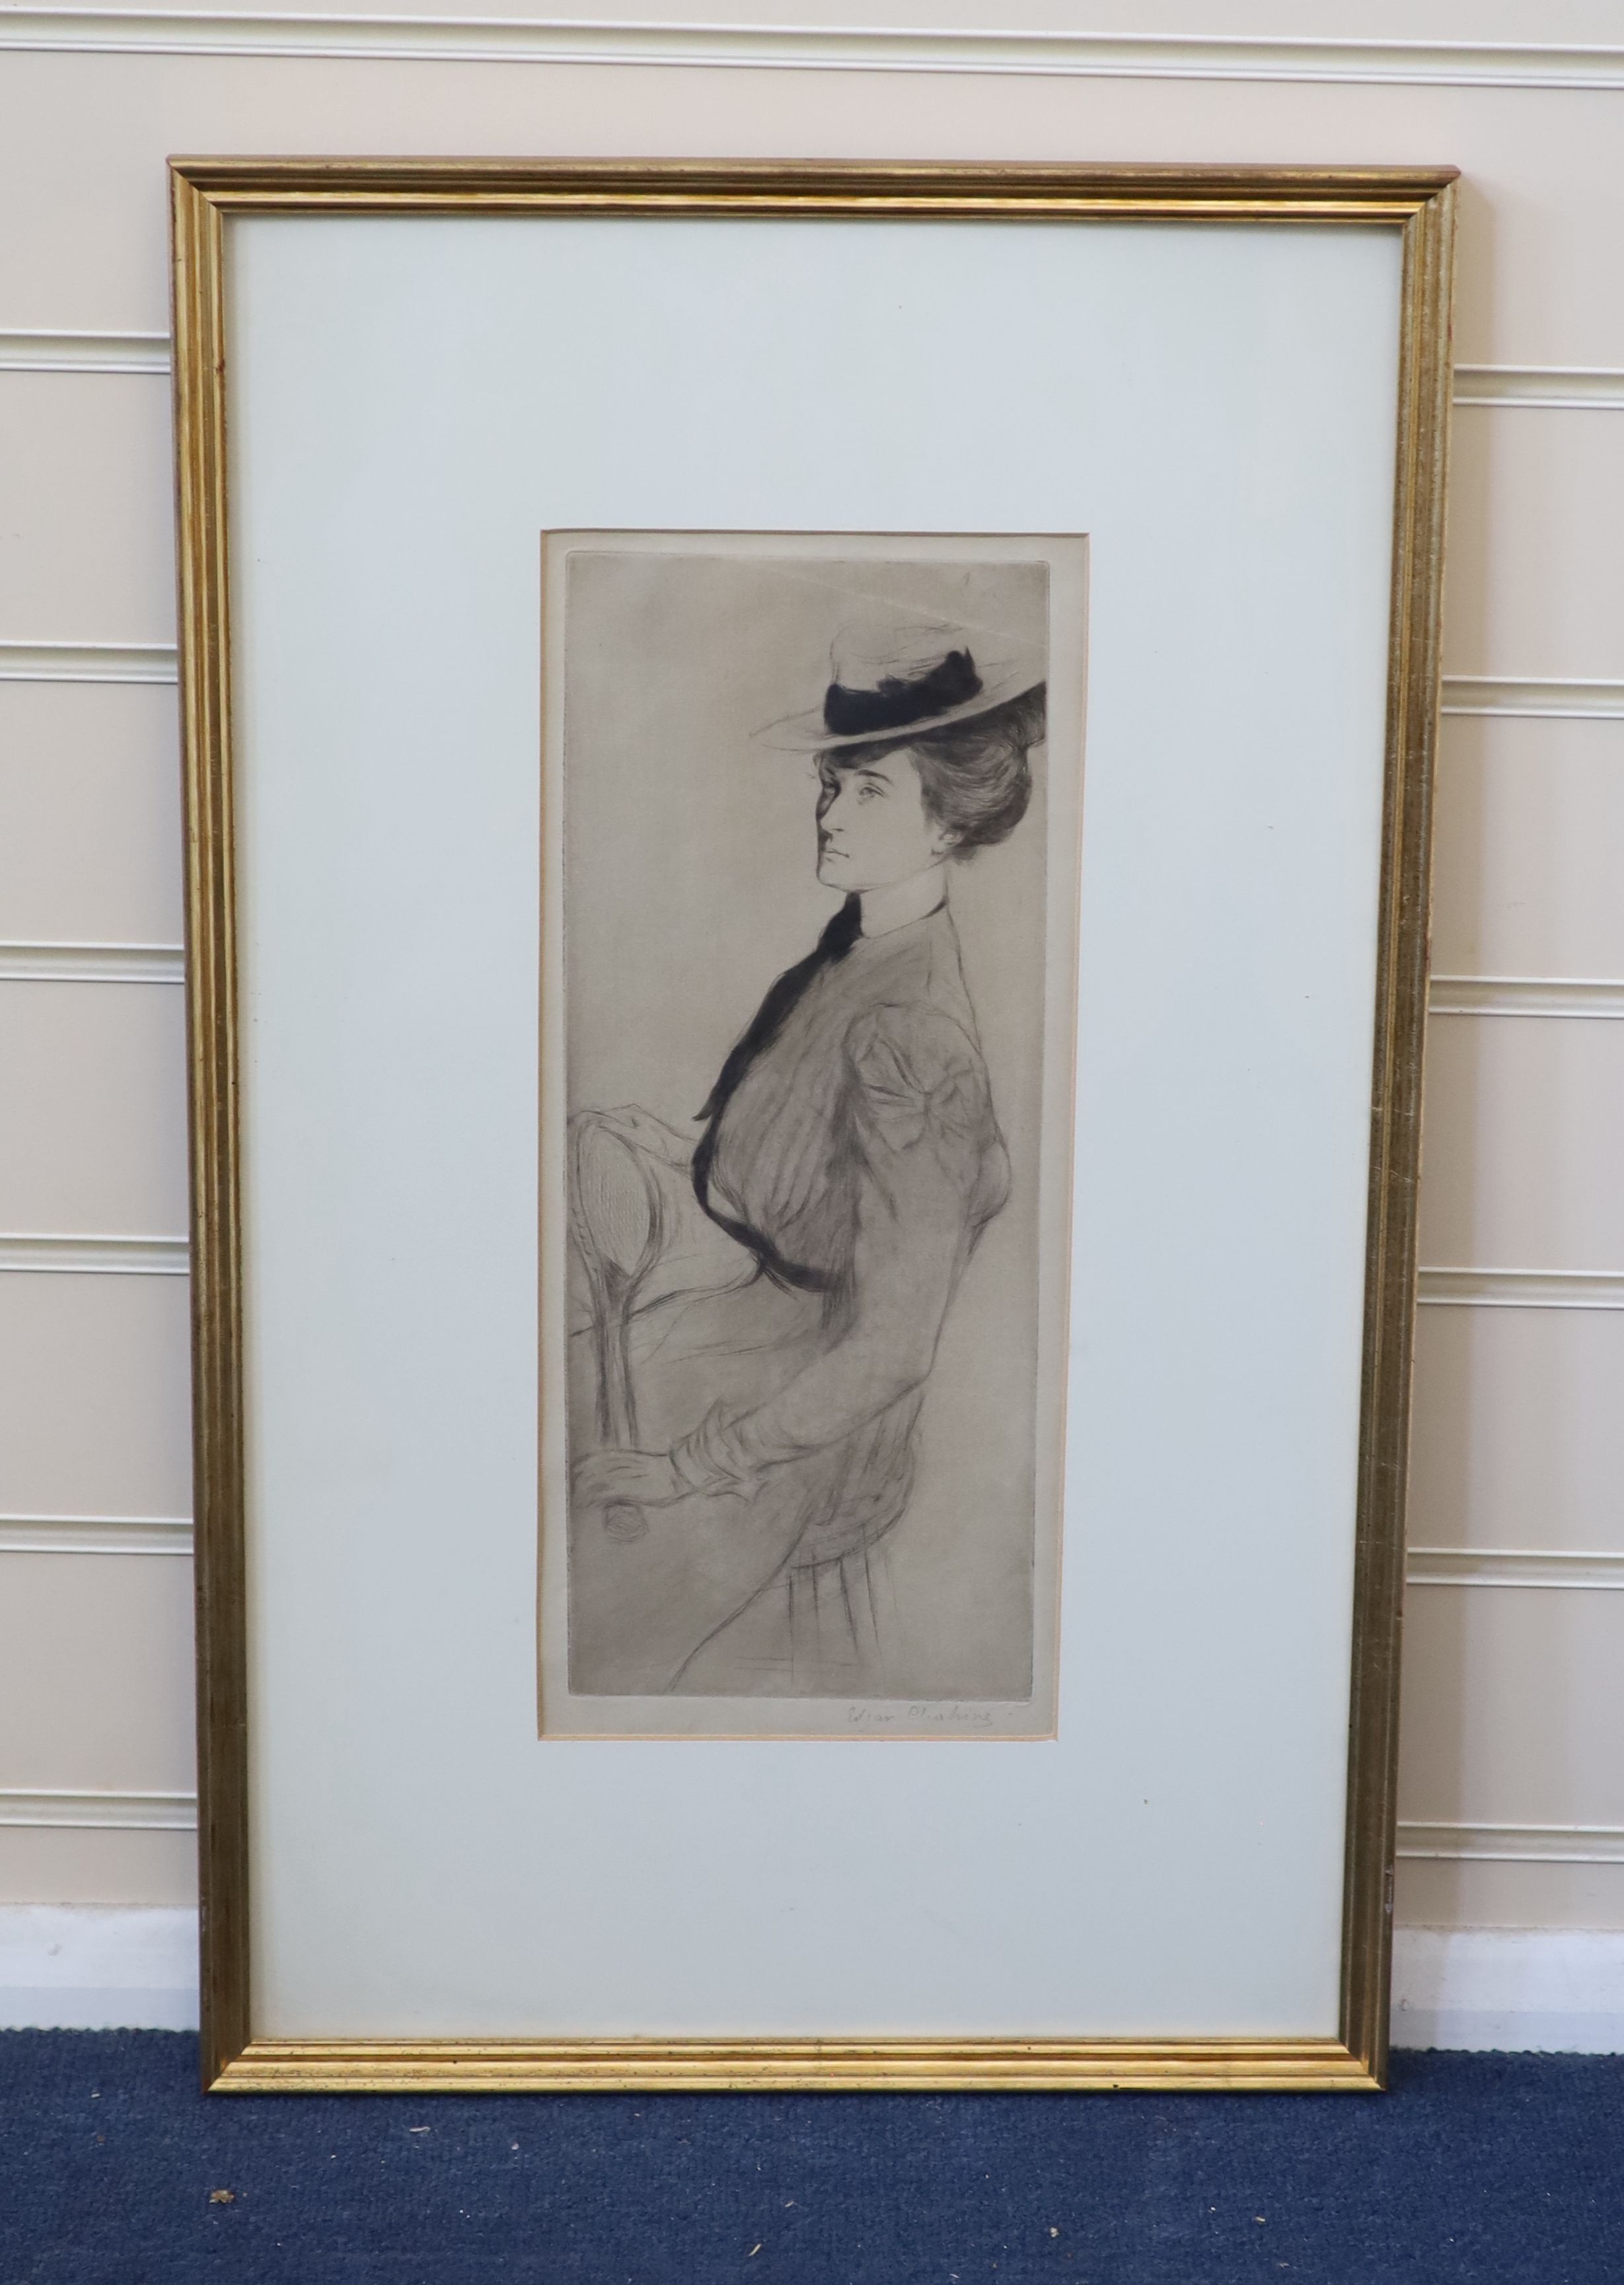 Edgar Chahine (1874-1947), drypoint etching, Demoiselle au Tennis, 1899, signed in pencil, from the edition of 70, 38 x 15cm